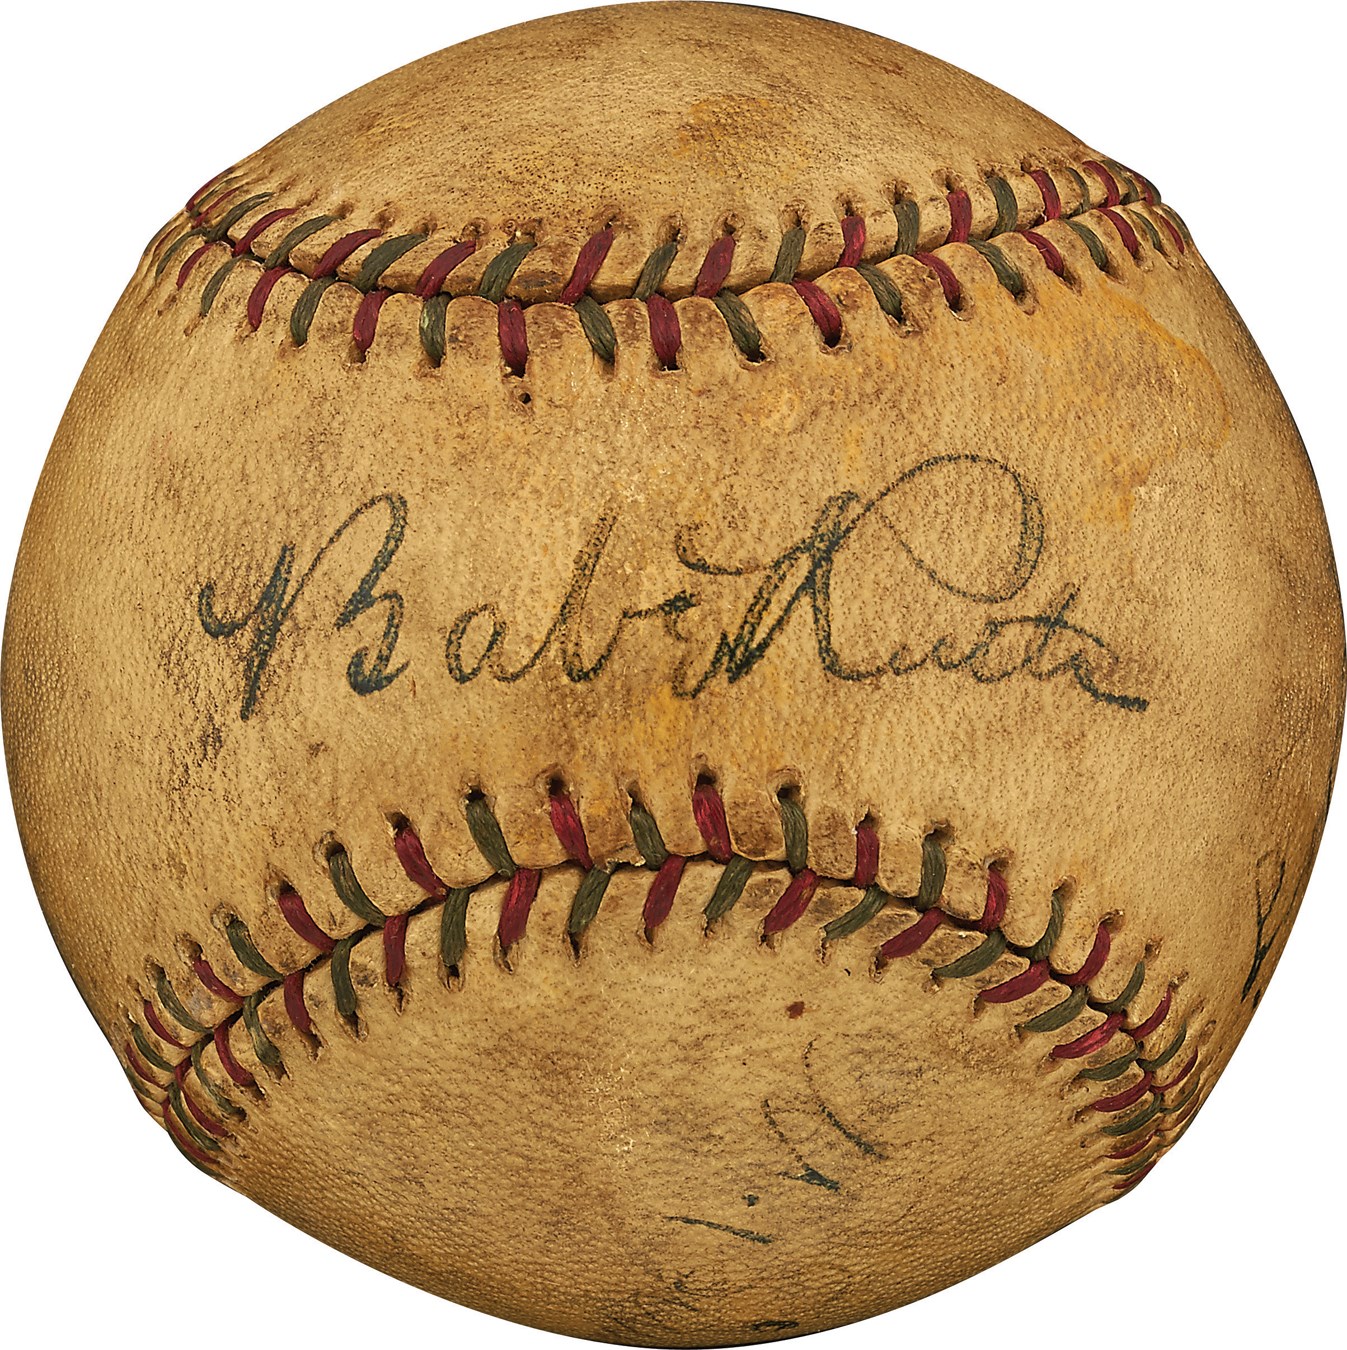 Ruth and Gehrig - 1928 Babe Ruth, Lou Gehrig & Al Simmons Signed Baseball (PSA)